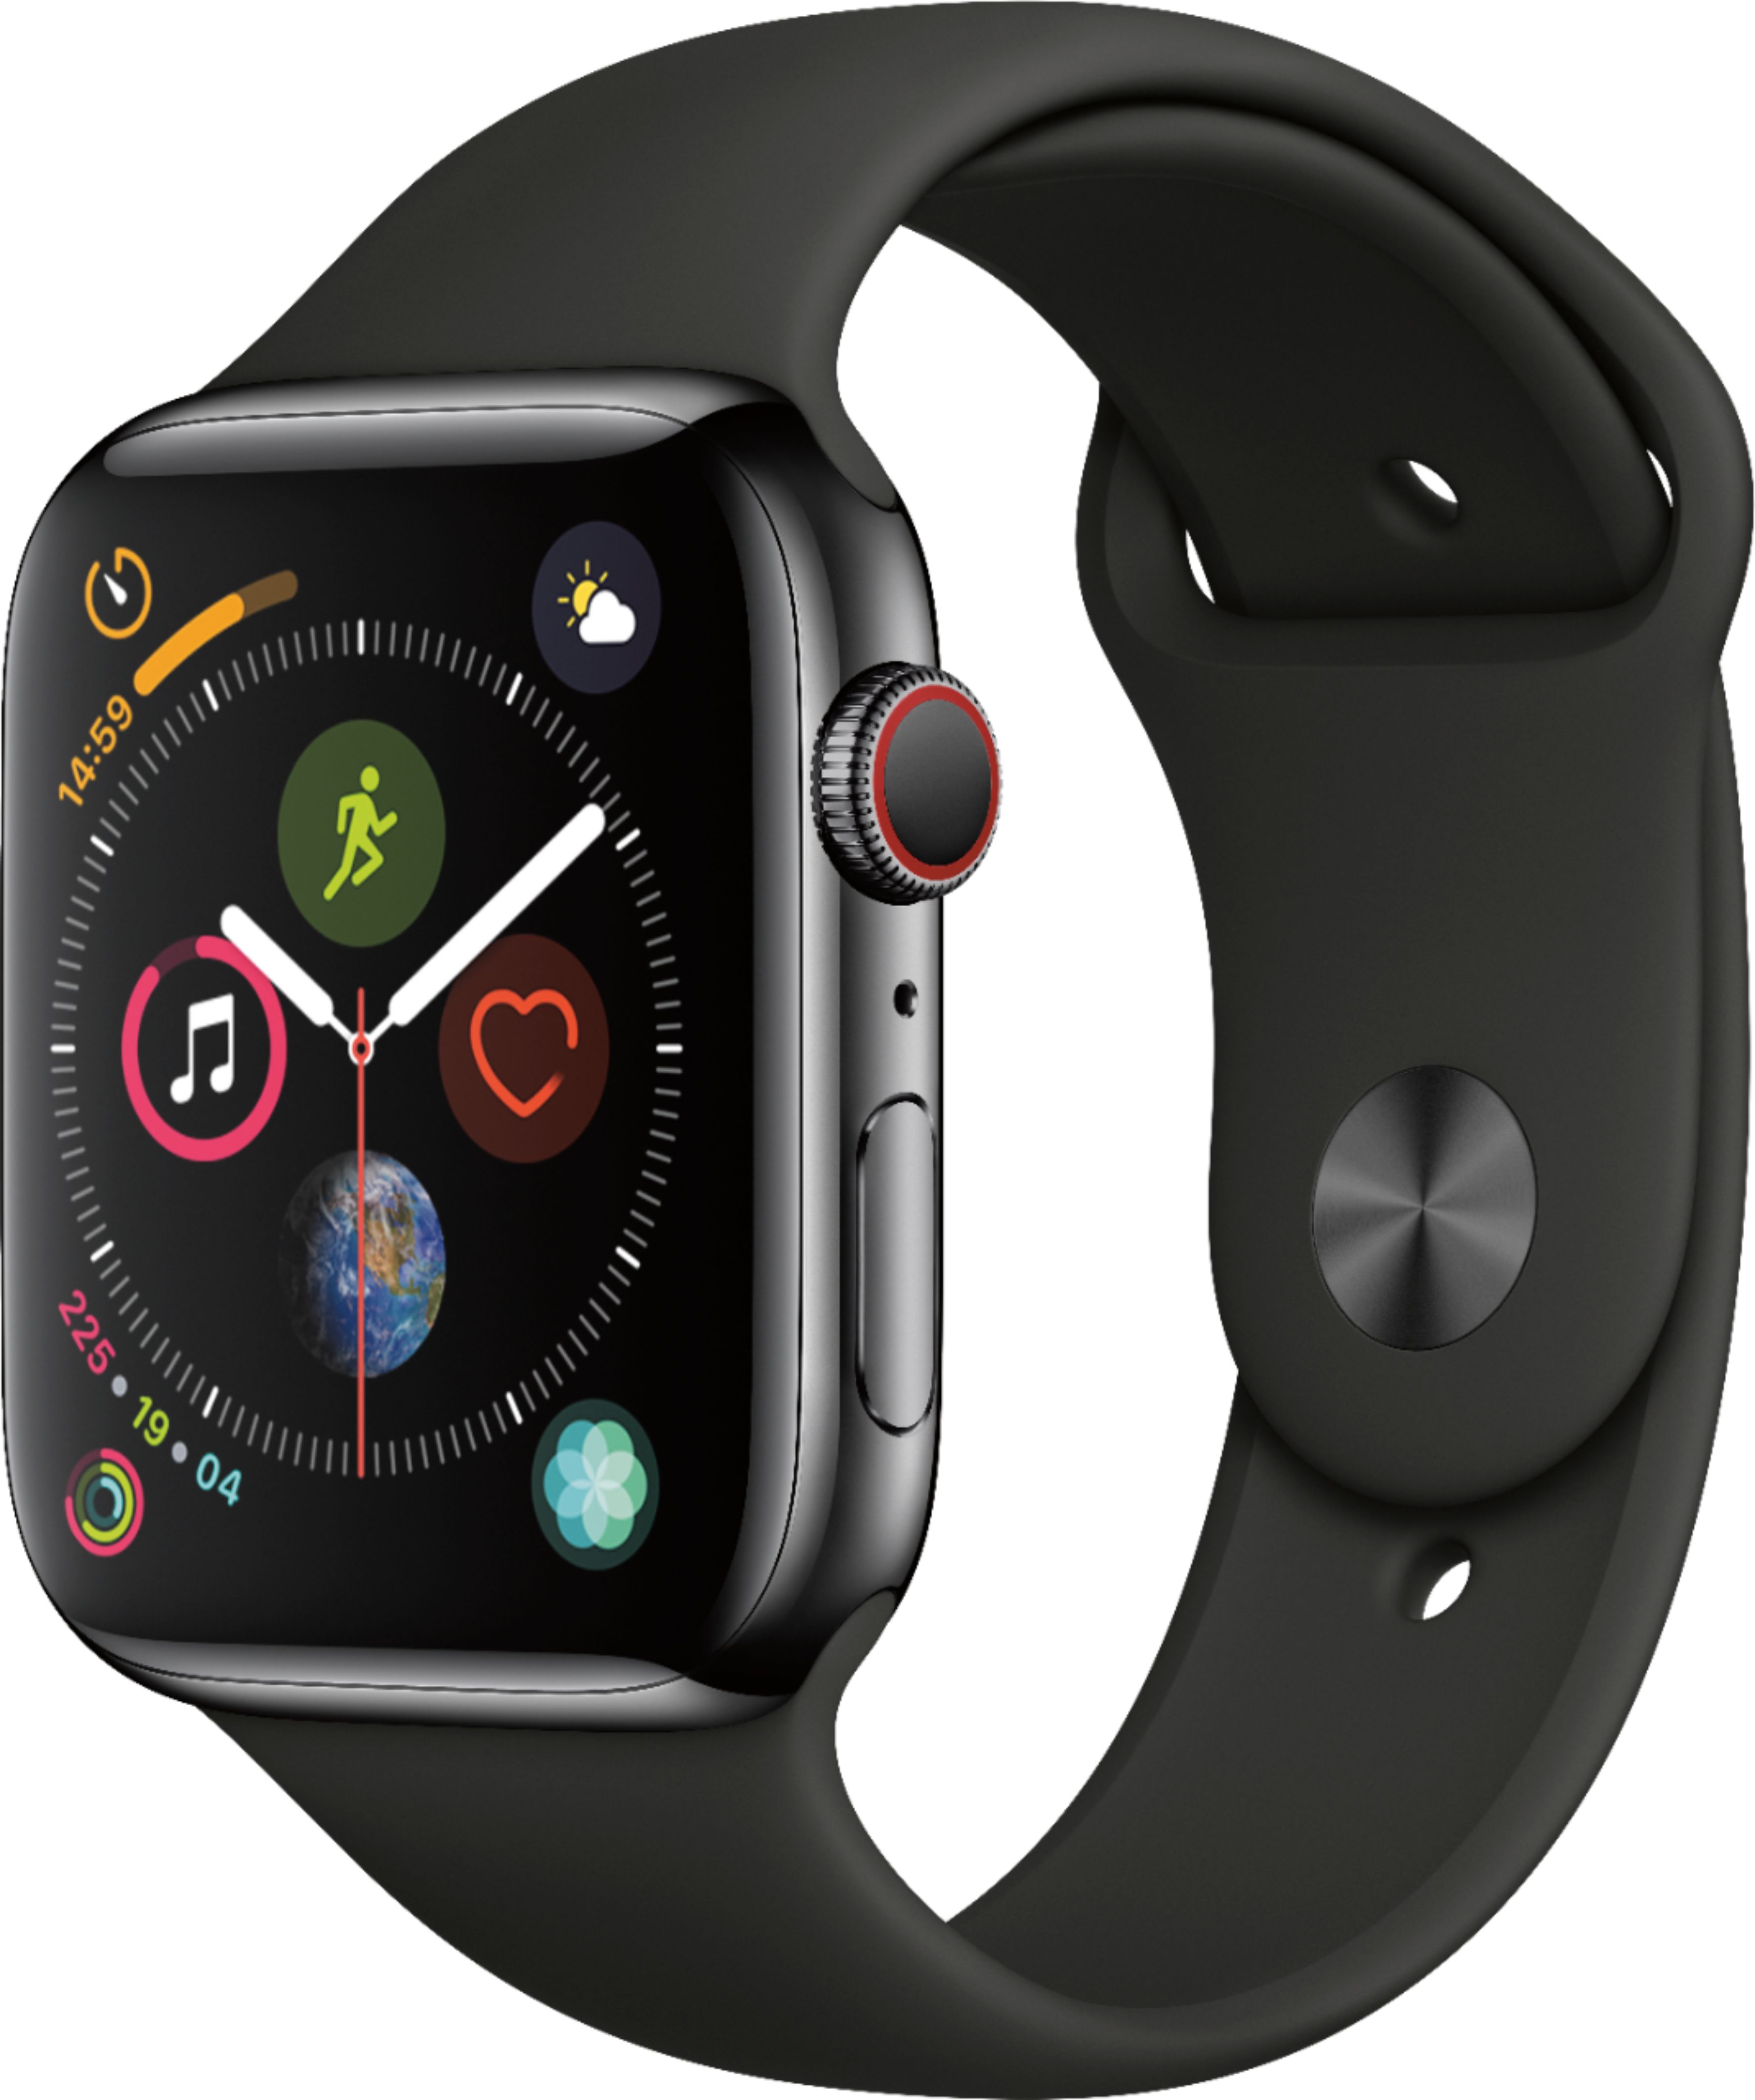 apple watch 4 with or without cellular